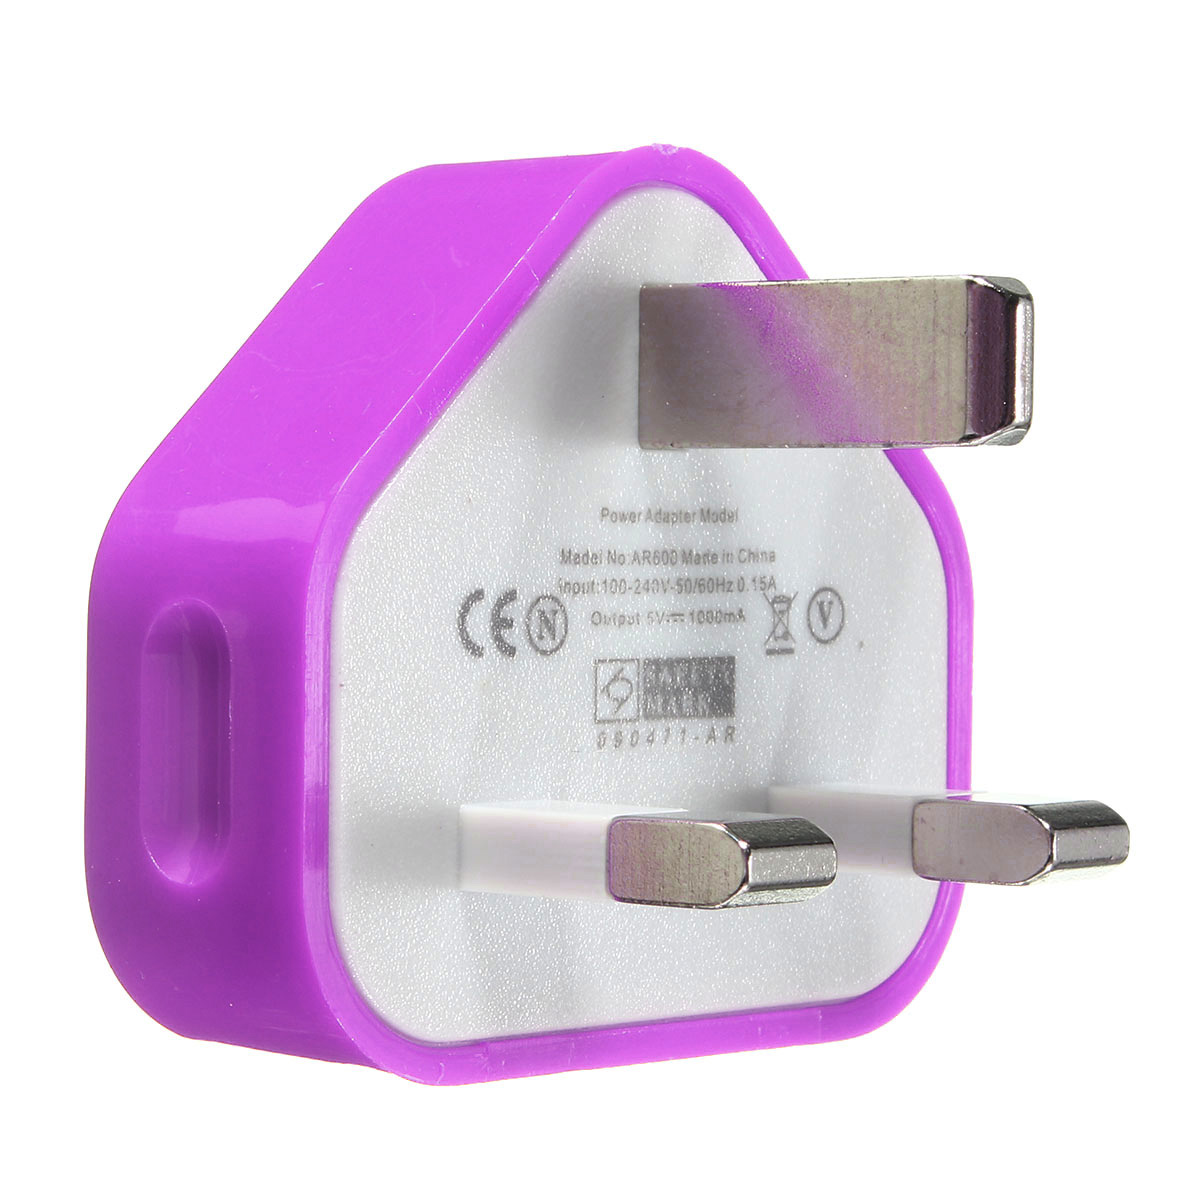 UK-USB-Plug-Charger-Mains-Wall-Home-Adapter-For-Samsung-Android-Phone-Tablets-1191576-6